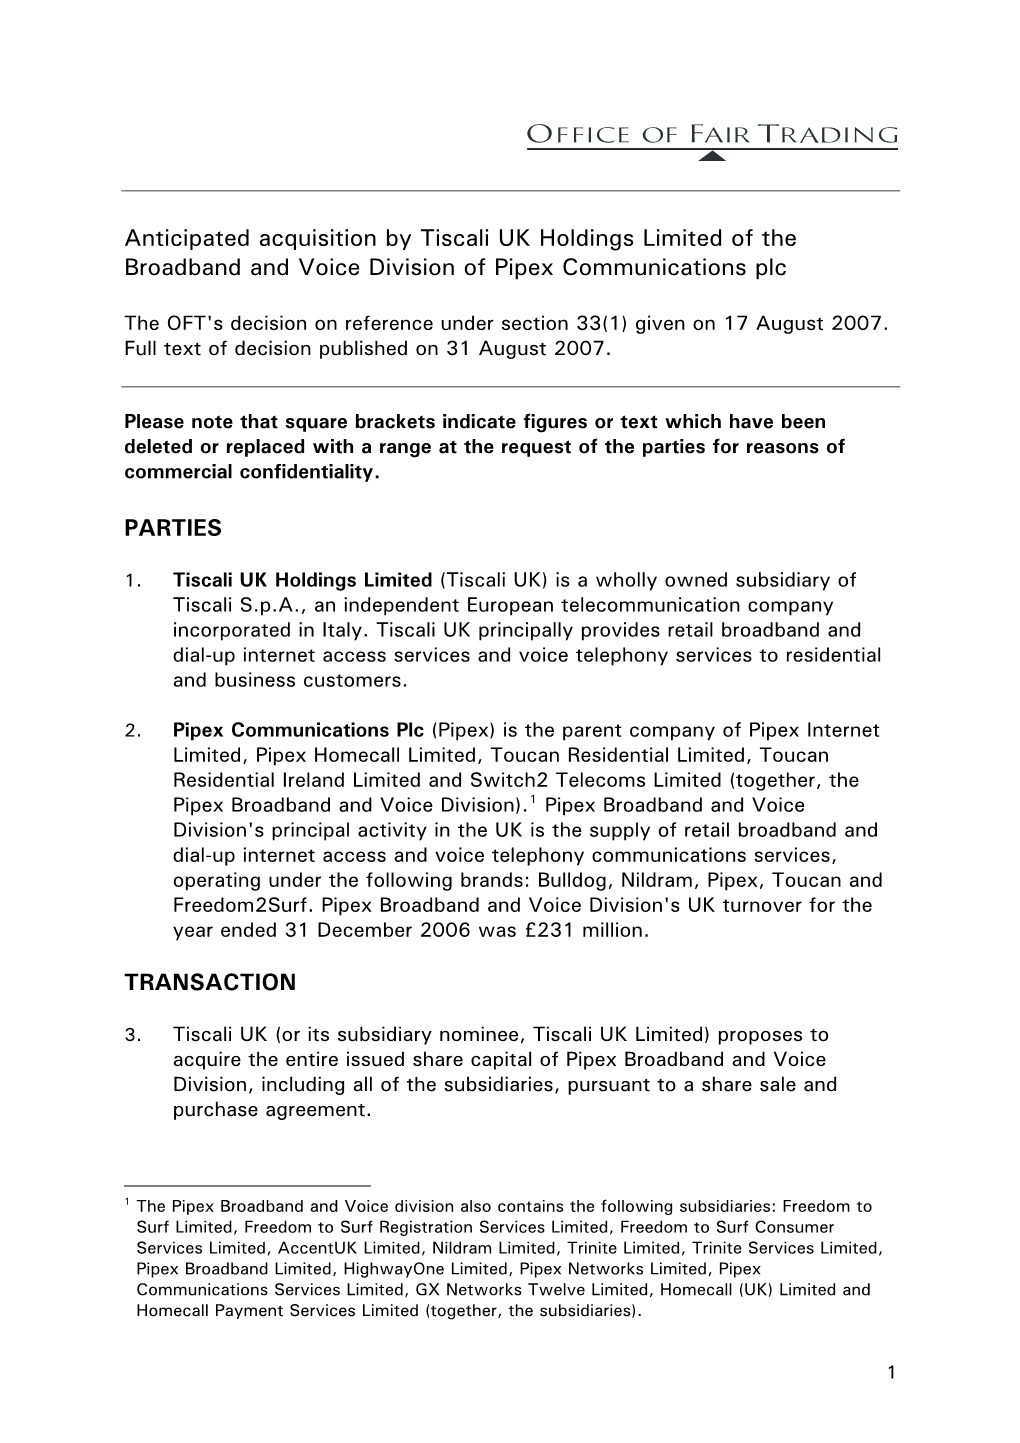 Anticipated Acquisition by Tiscali UK Holdings Limited of the Broadband and Voice Division of Pipex Communications Plc